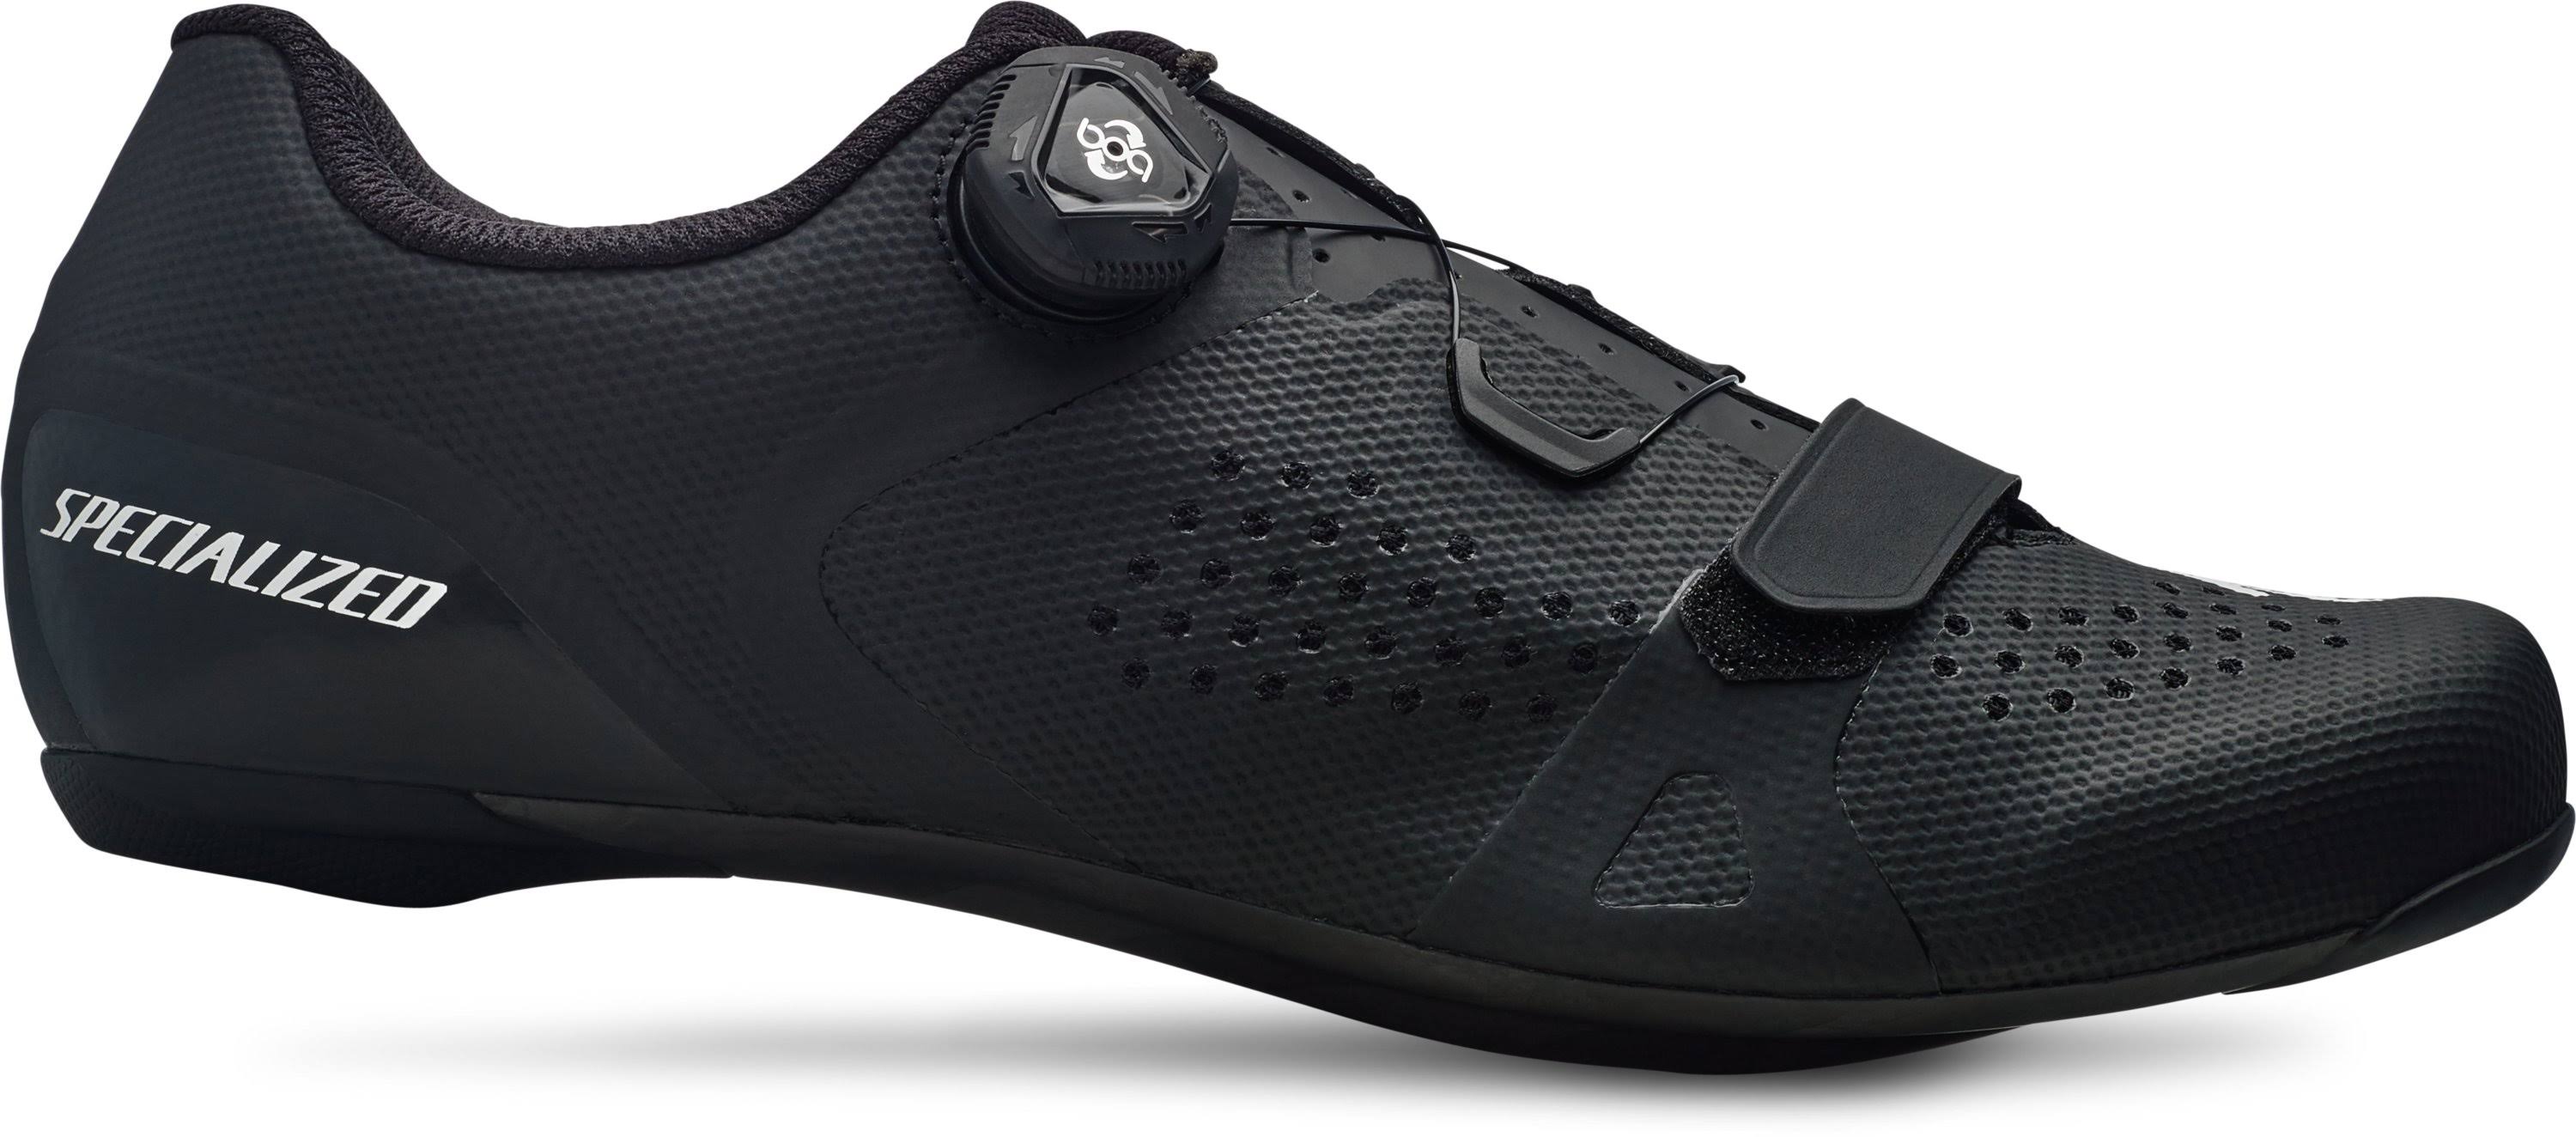 Specialized Torch 2.0 Road Shoes - Black - 45